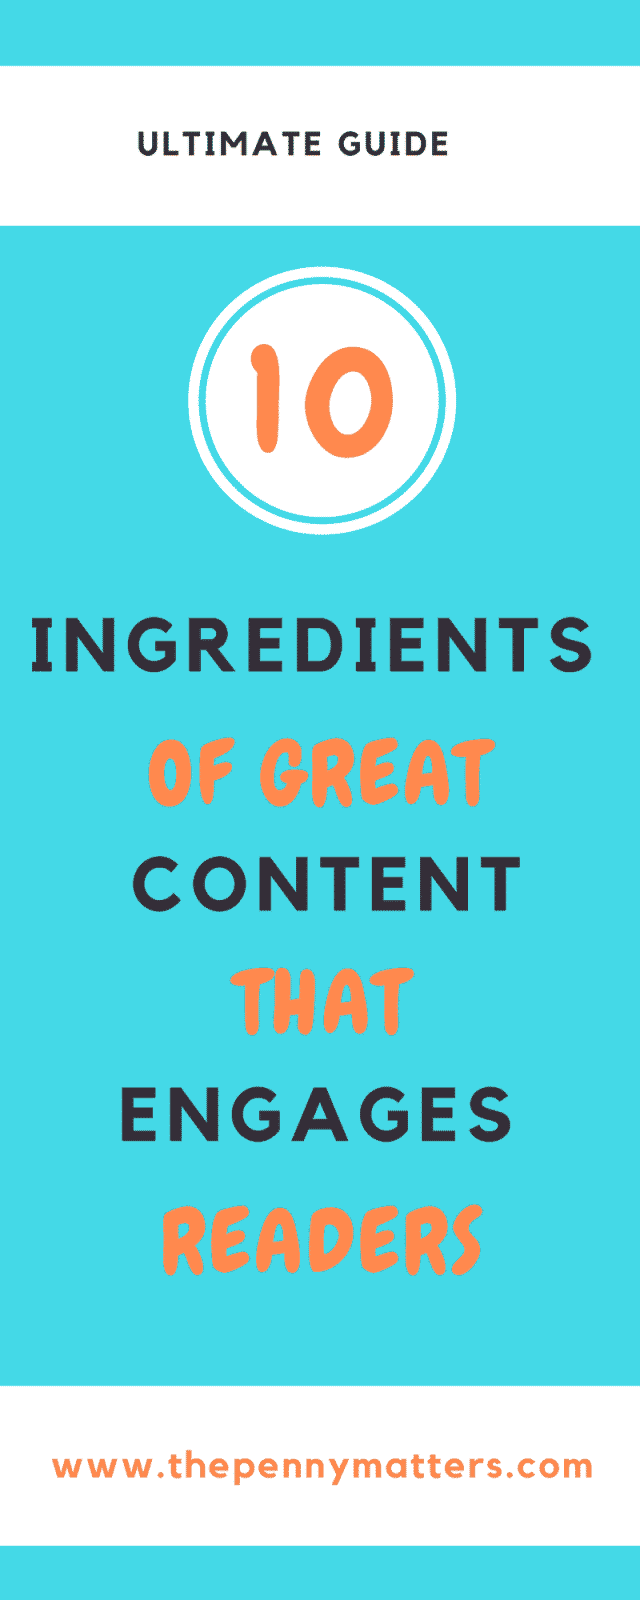 Ten Ingredients of Great Content That Engages Readers